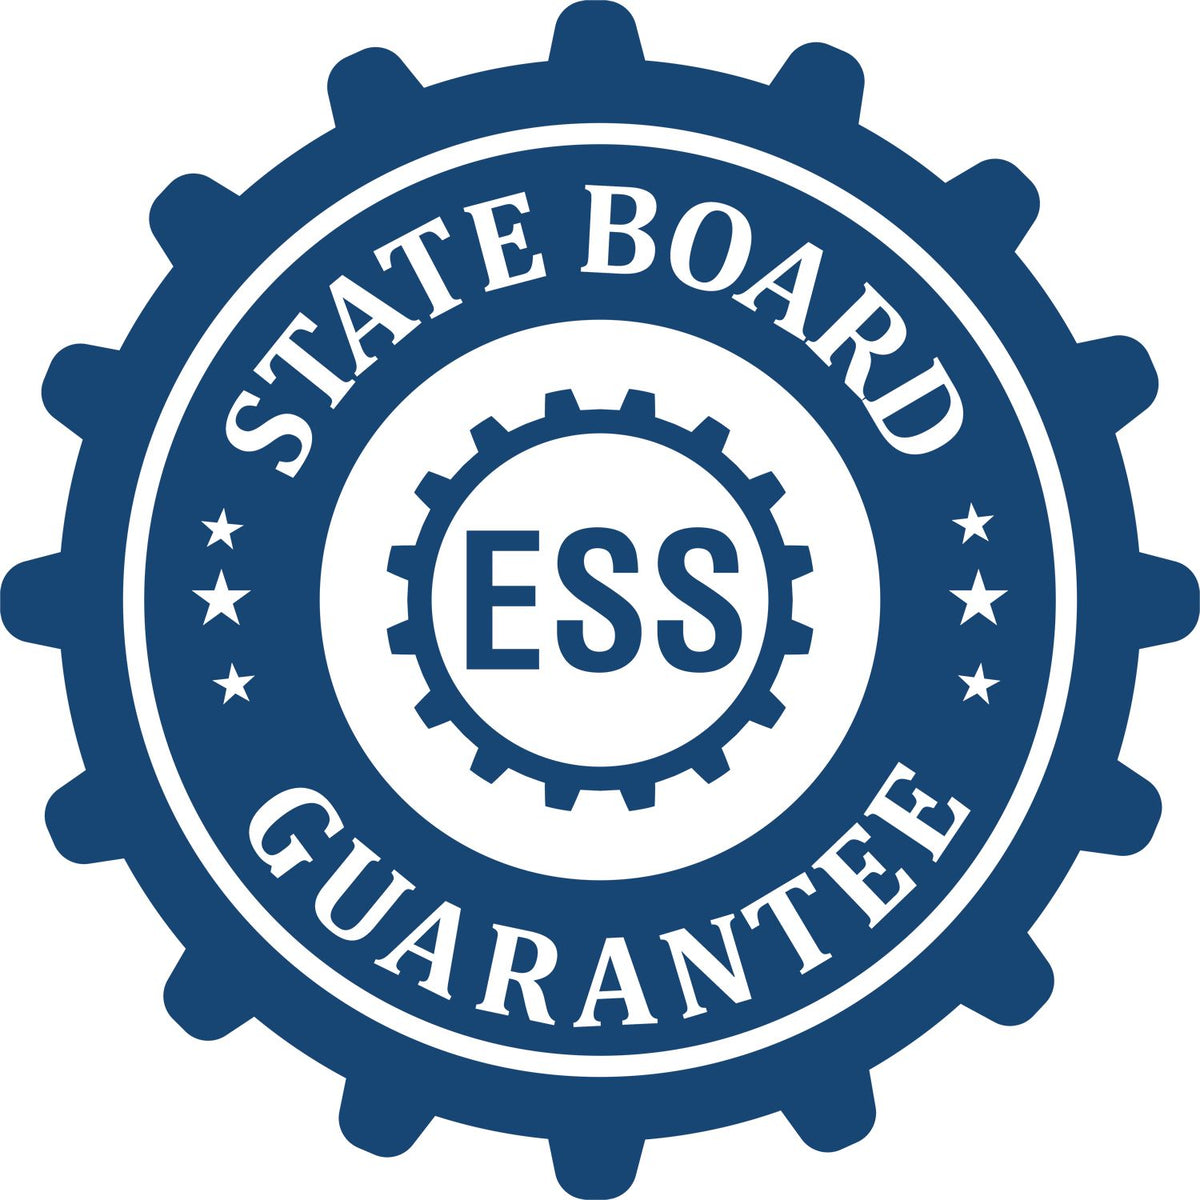 An emblem in a gear shape illustrating a state board guarantee for the Gift Mississippi Landscape Architect Seal